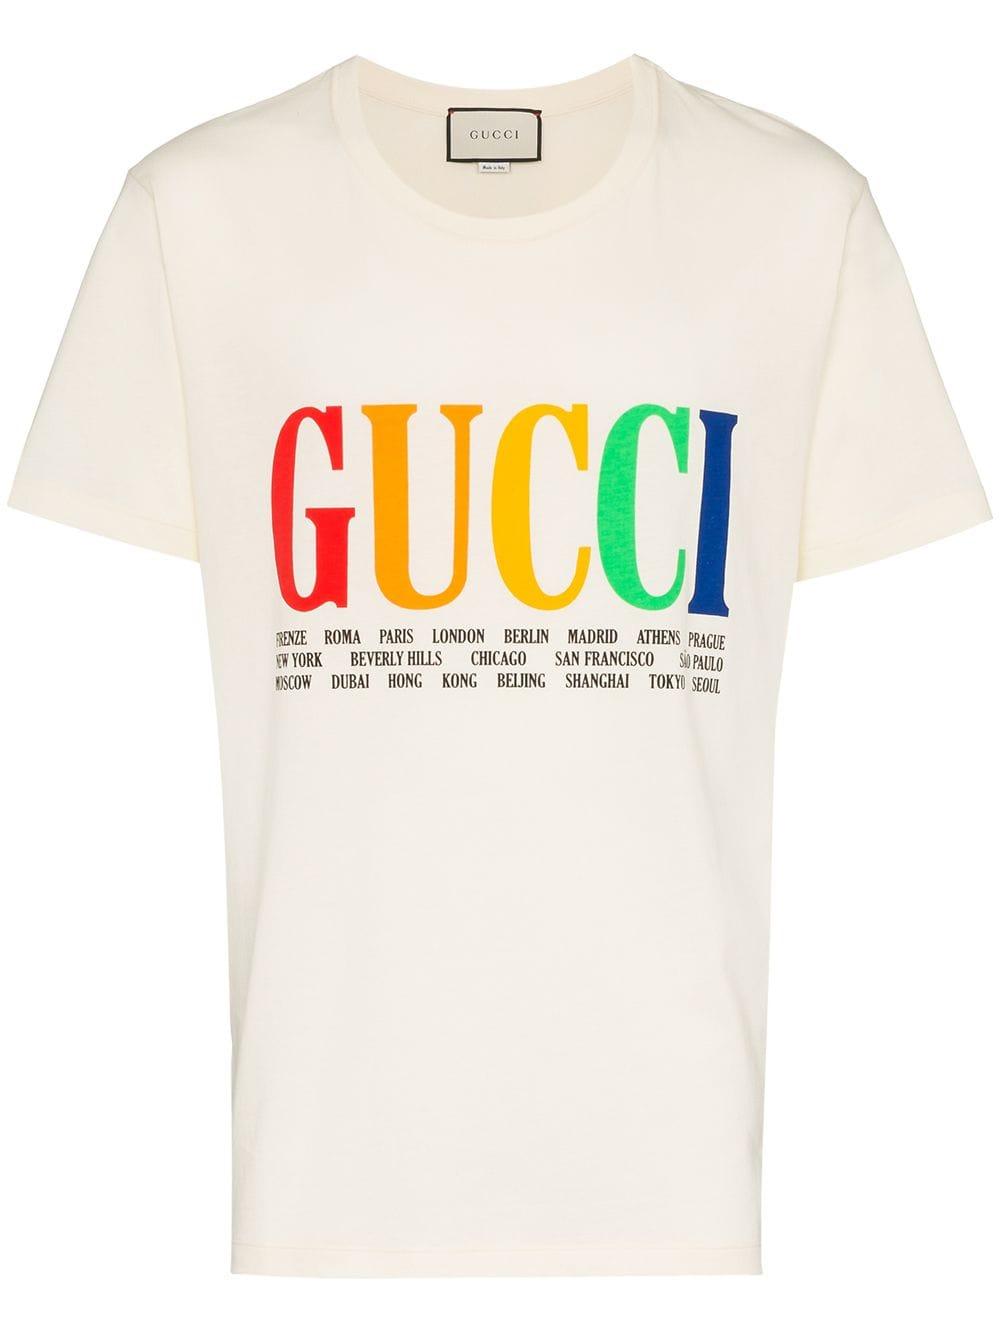 Gucci Rainbow Cities Print Cotton T Shirt in White for Men - Lyst